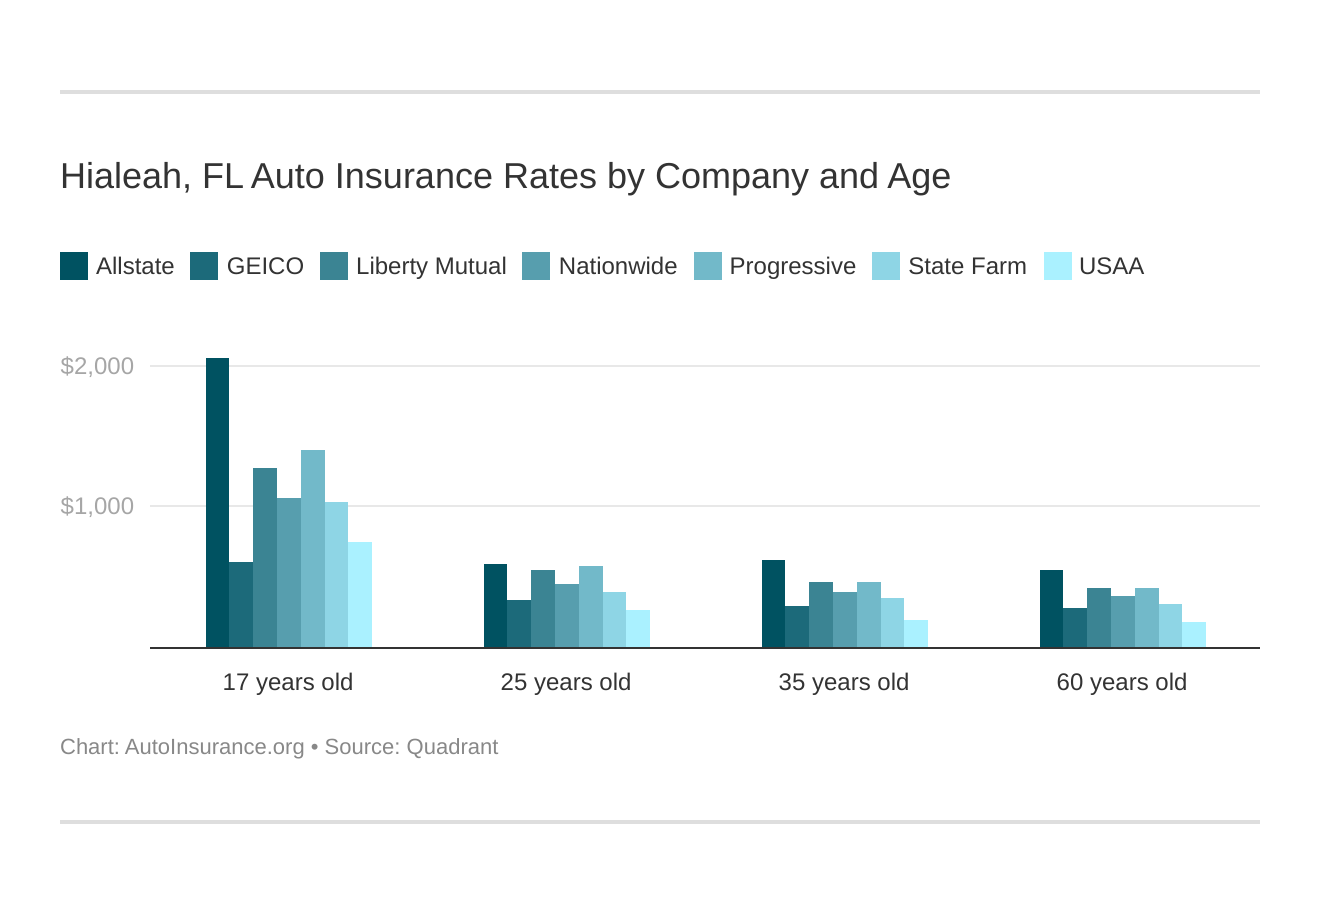 Hialeah, FL Auto Insurance Rates by Company and Age